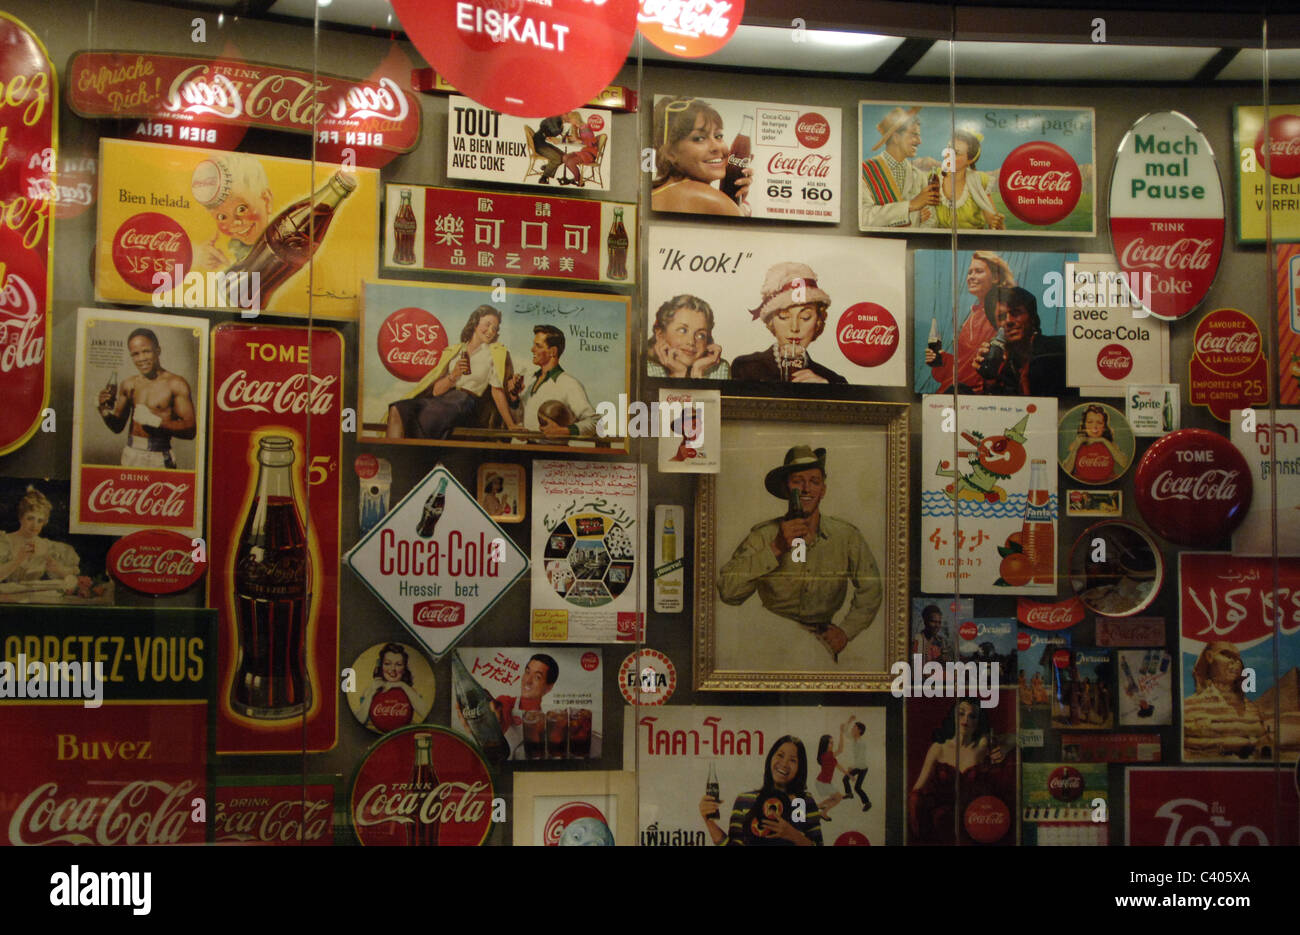 World of Coca-Cola. Permanent exhibition featuring the history of The Coca-Cola Company. Old advertising for Coke. Atlanta. USA. Stock Photo